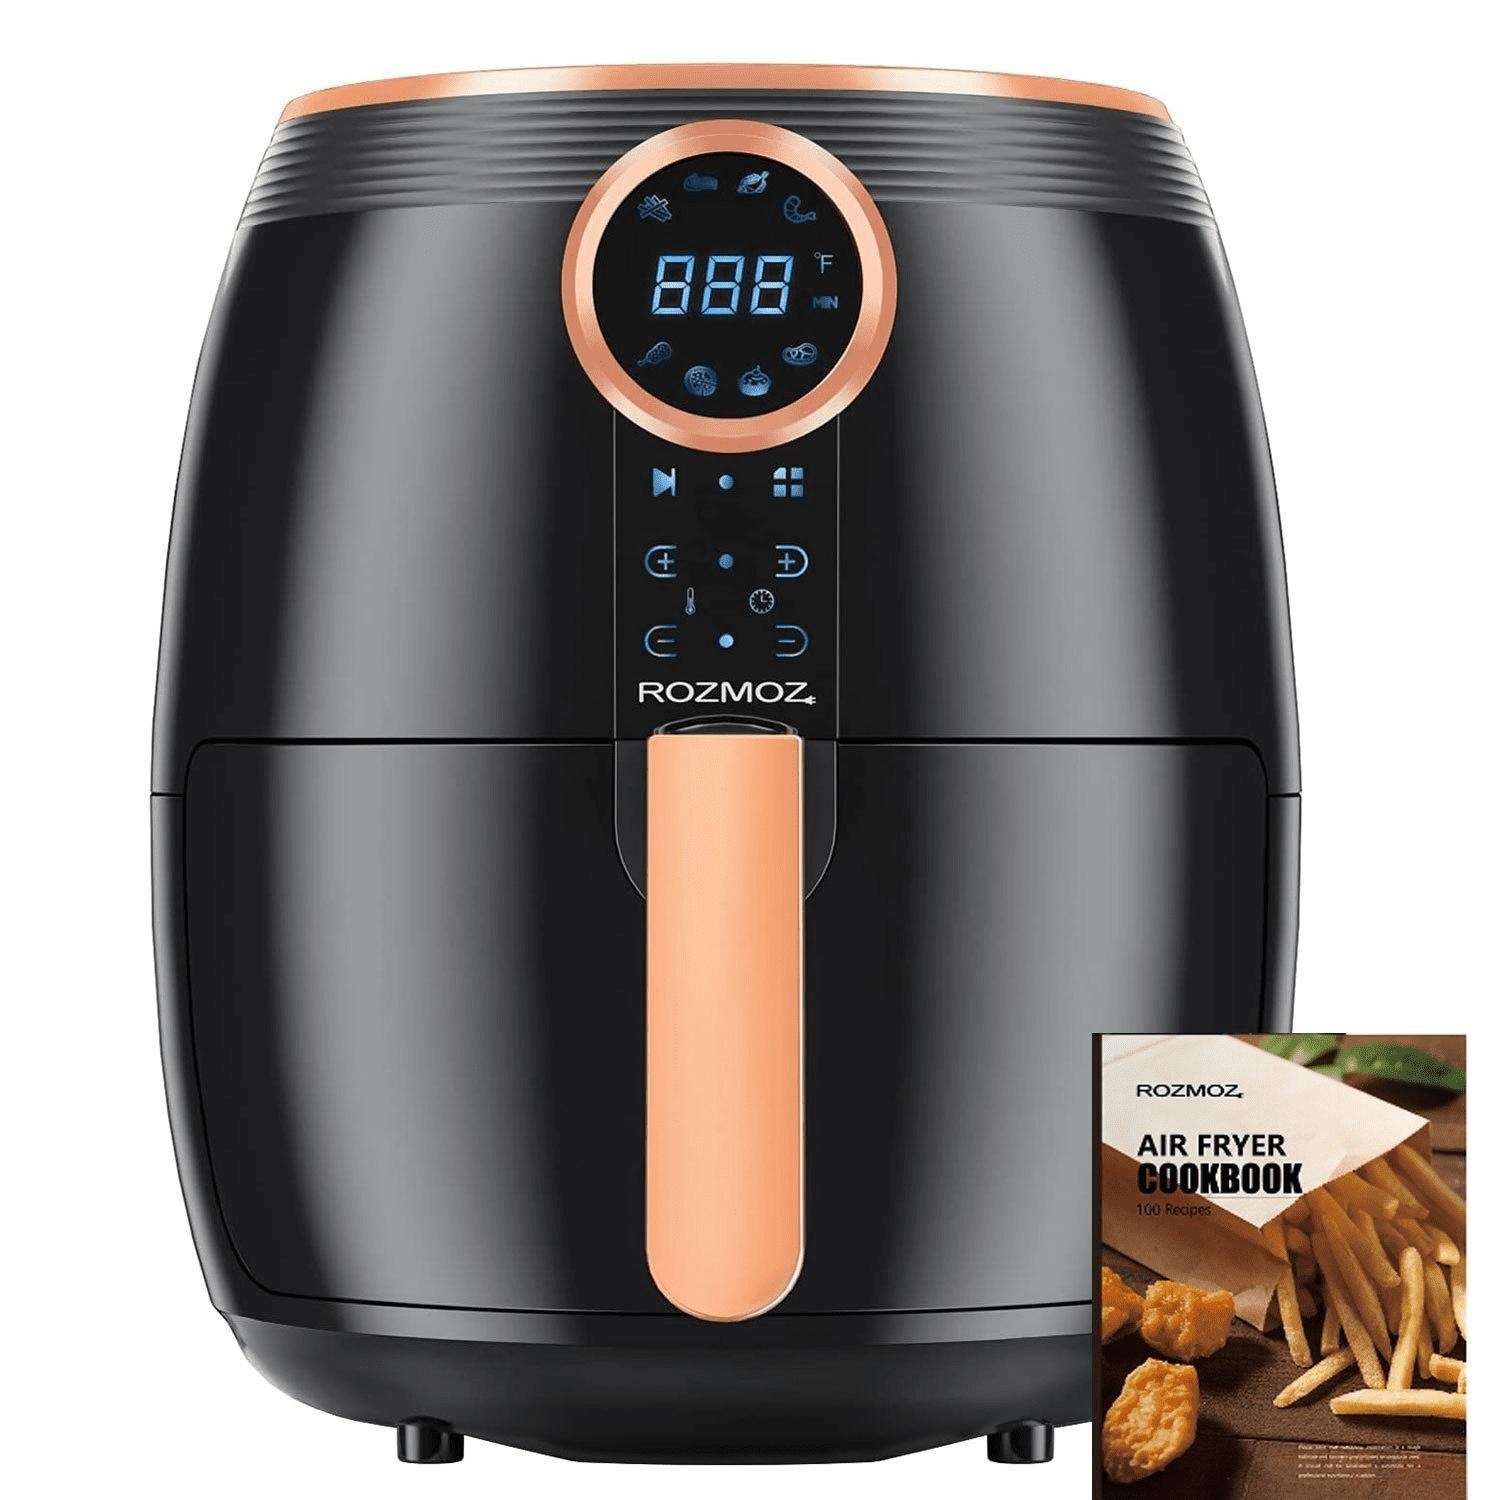 https://ak1.ostkcdn.com/images/products/is/images/direct/cbdee746dc6dc714f249a4ead91f04e1658c2b7c/Healthy-Air-Fryers%2C-5.2Qt-Air-Fryer%2C-8-Preset-Oil-Less-Frying-Modes%2C-Quickly-Heating-with-Air-Fryer-Cookbook%2C-Black.jpg